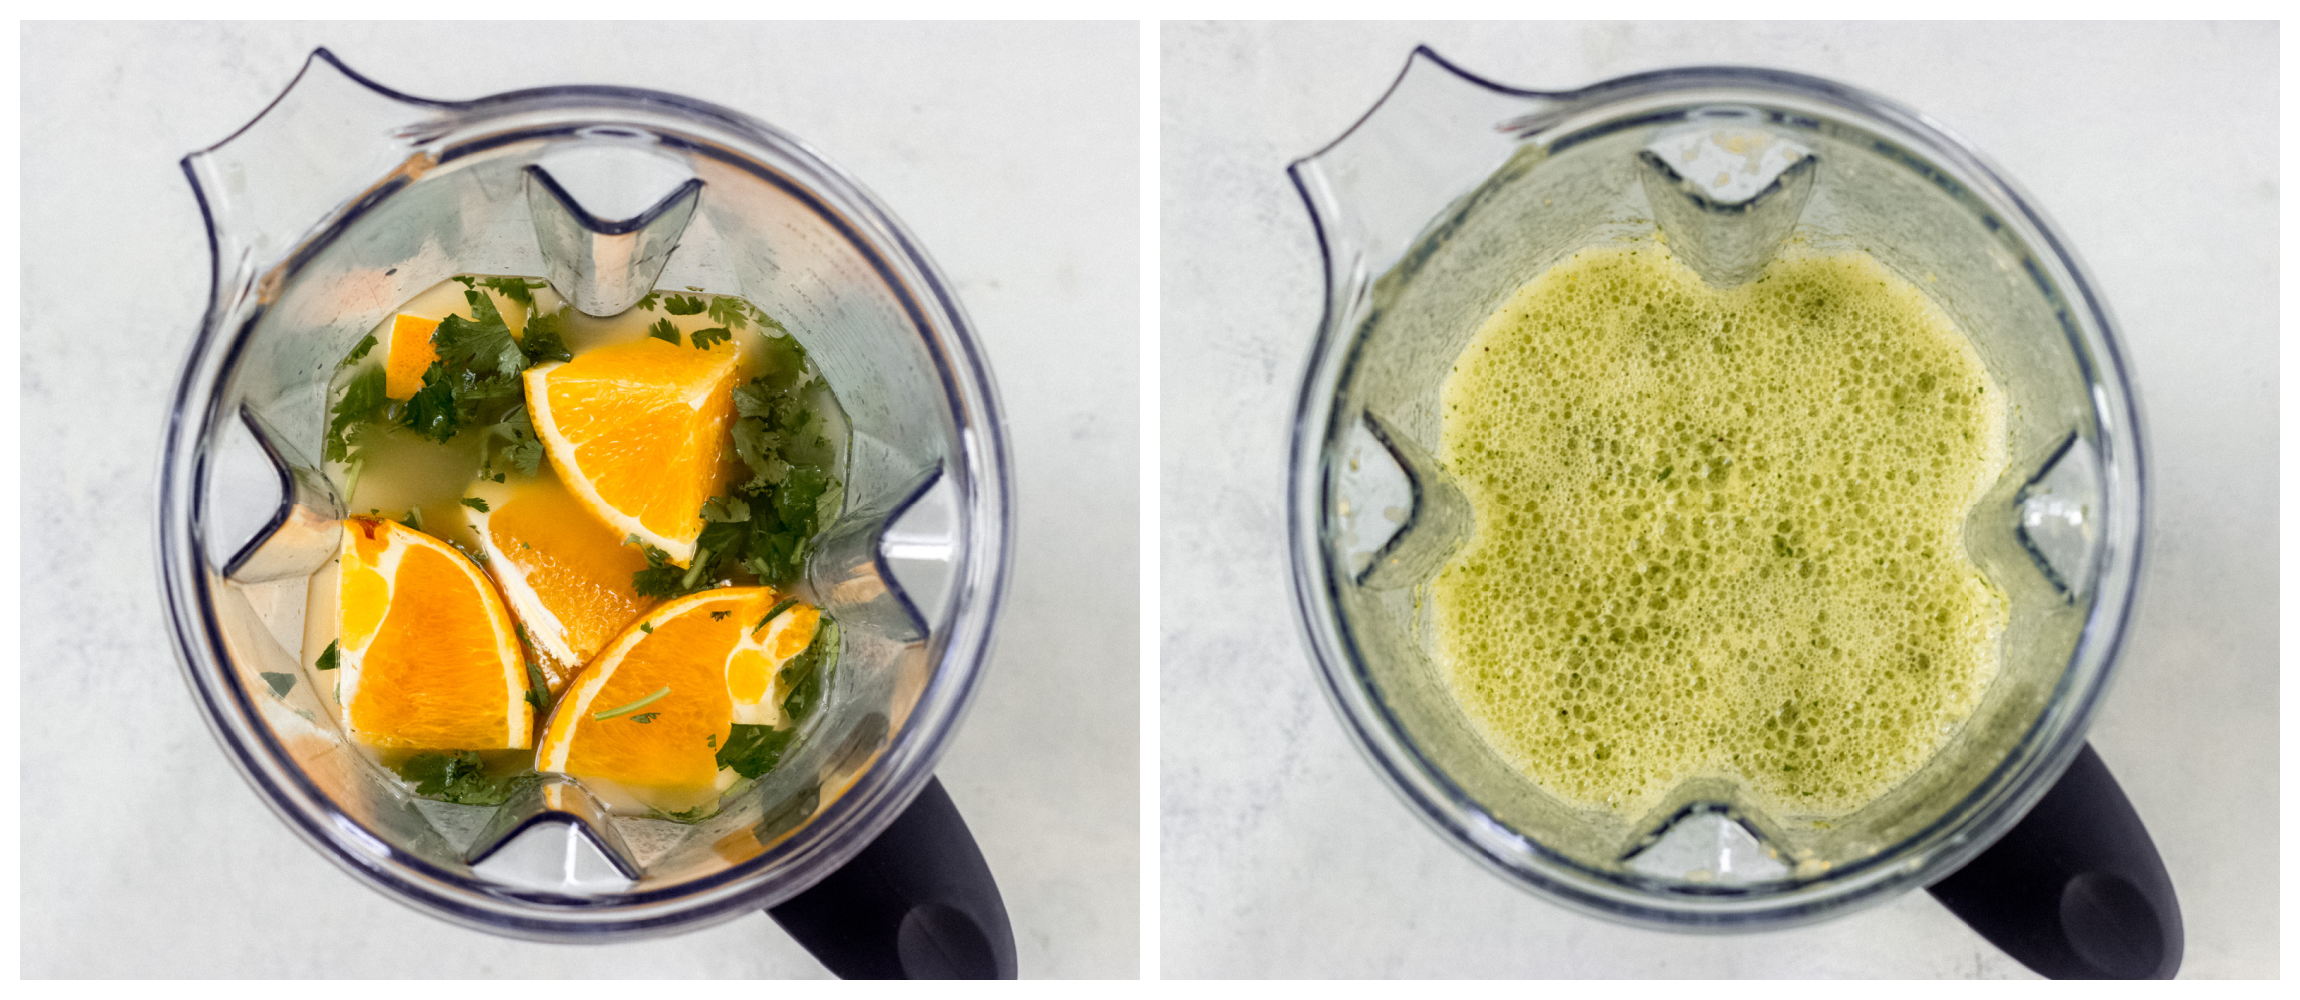 two blender photos showing cut up oranges and greens in one, and pureed ingredients in second.